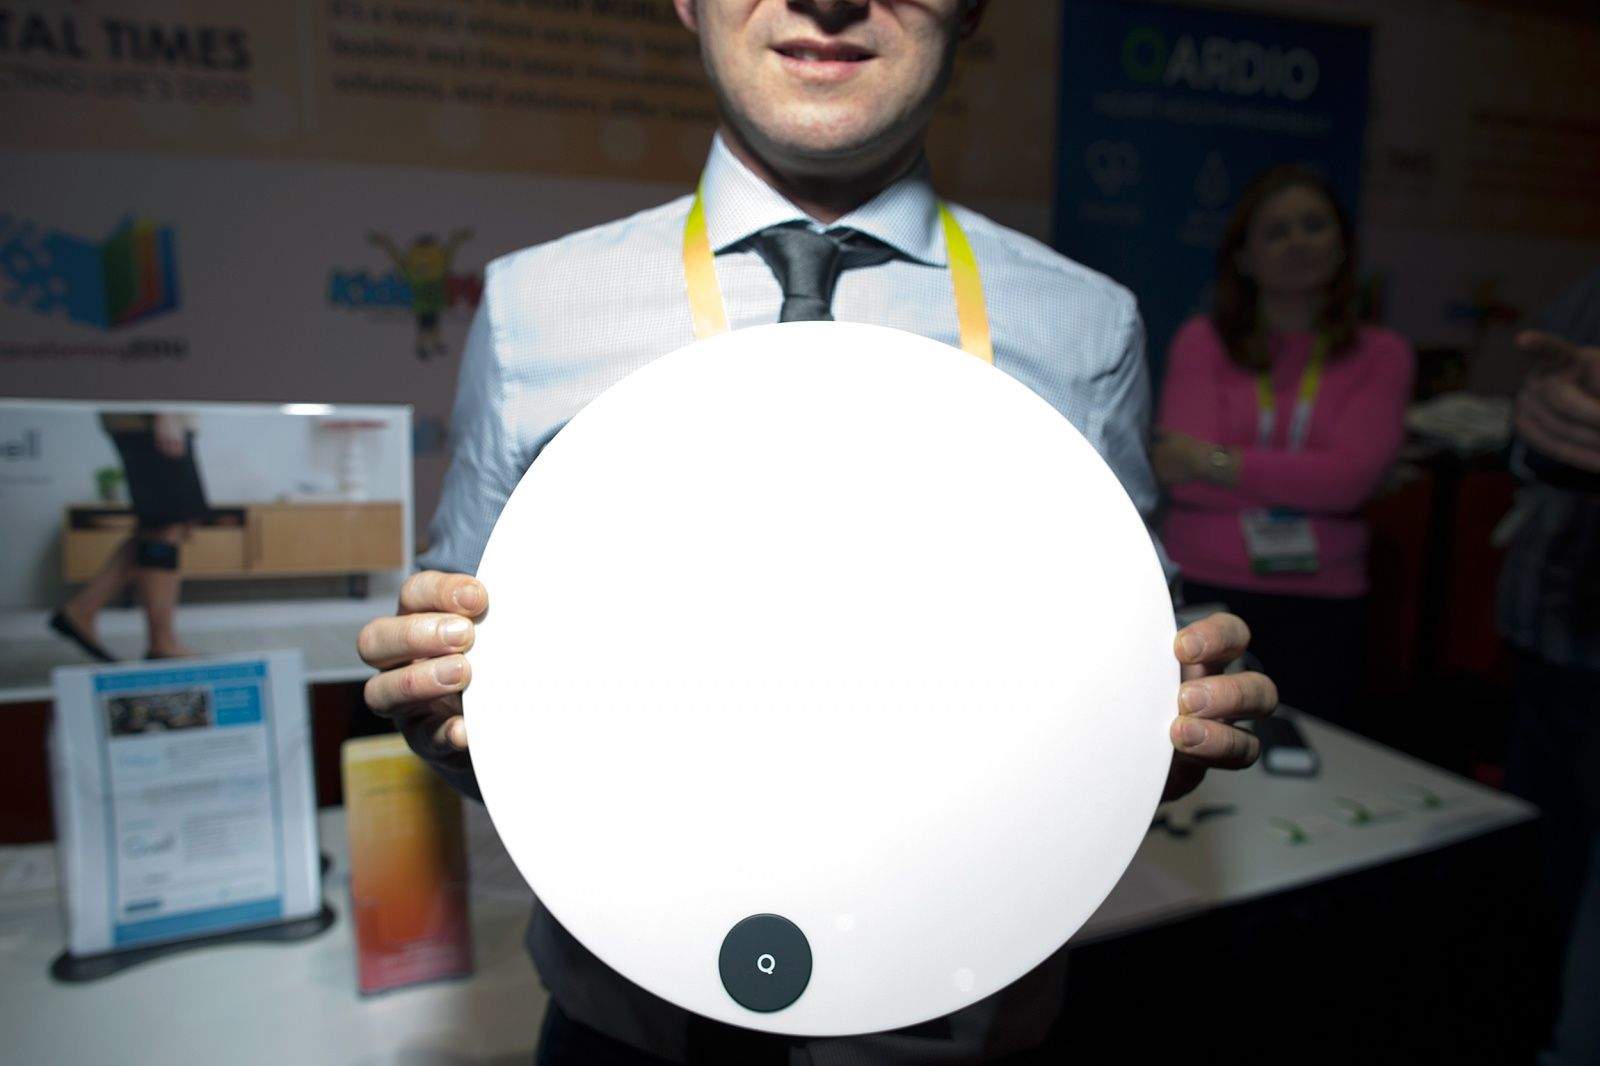 Qardio's new smart scale won't automatically frown if you overate last night. Photo: Jim Merithew/Cult of Mac